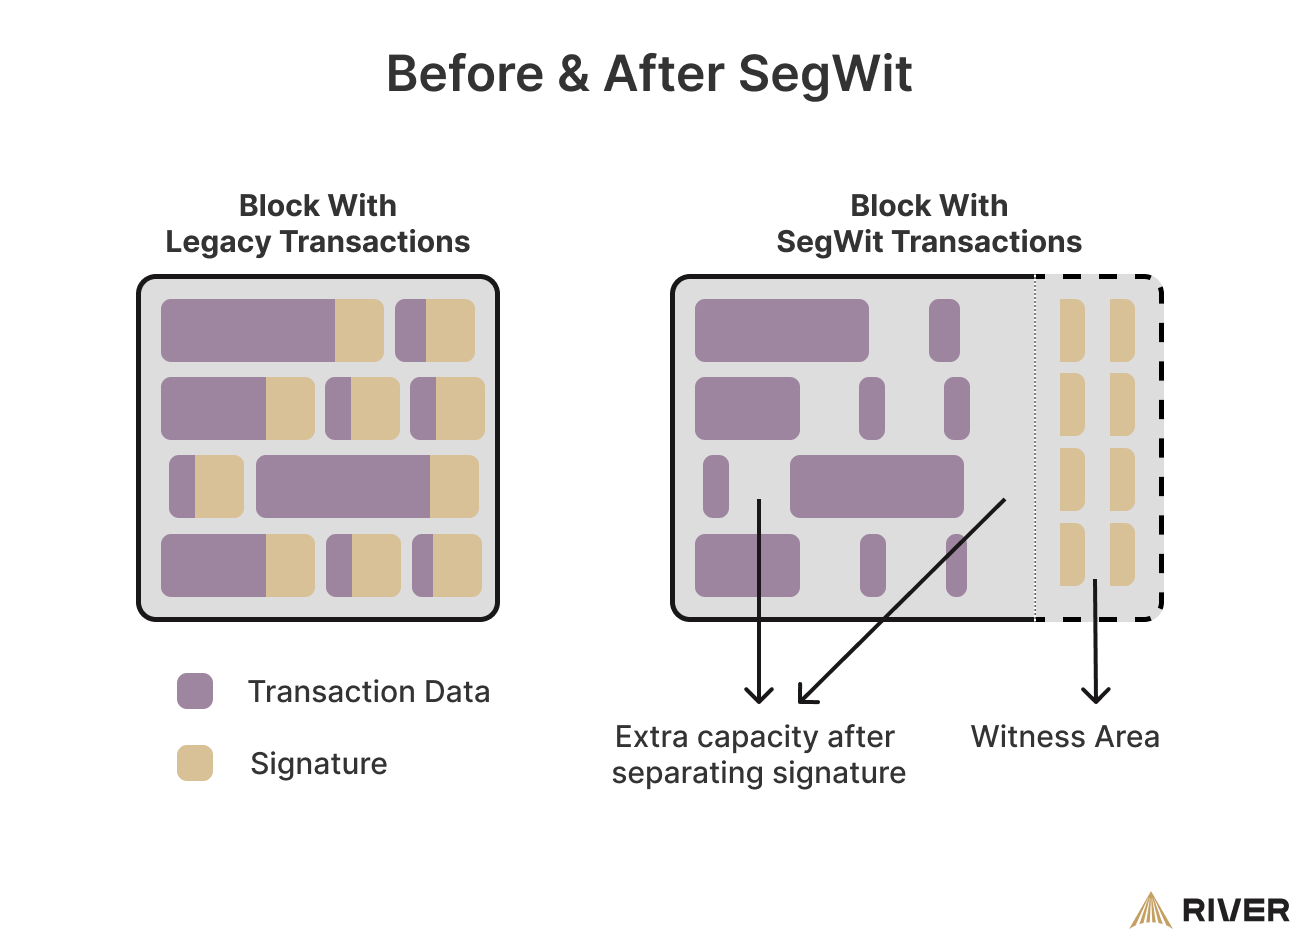 Comparison diagram illustrating the difference between Bitcoin blocks before and after the implementation of Segregated Witness (SegWit). The left side shows a block with legacy transactions filled with transaction data and signature data. The right side shows a block with SegWit transactions, where the signature data is separated into a distinct witness area, creating extra capacity within the main block space. This visual explains how SegWit optimizes block space usage and increases transaction capacity in the Bitcoin network.